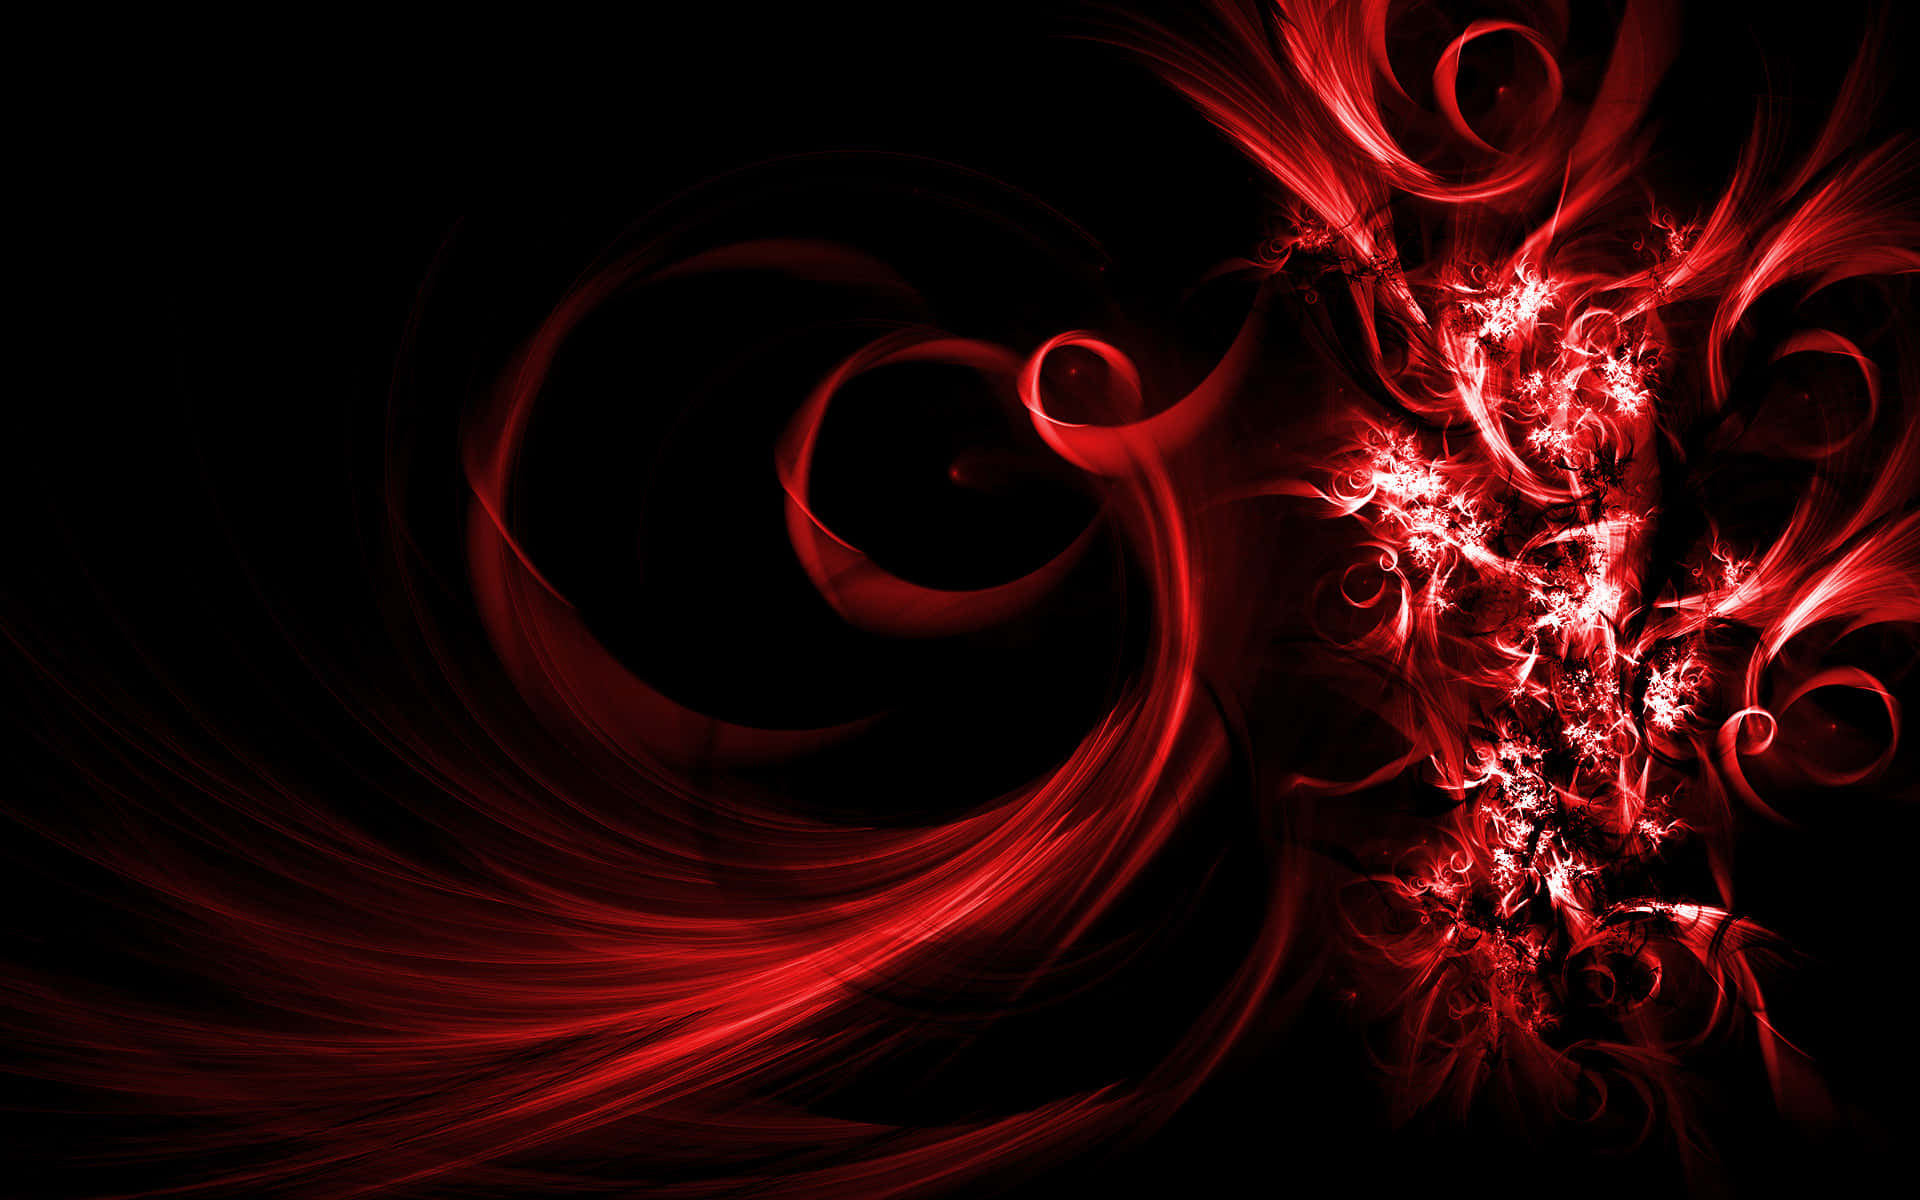 Background of vibrant red